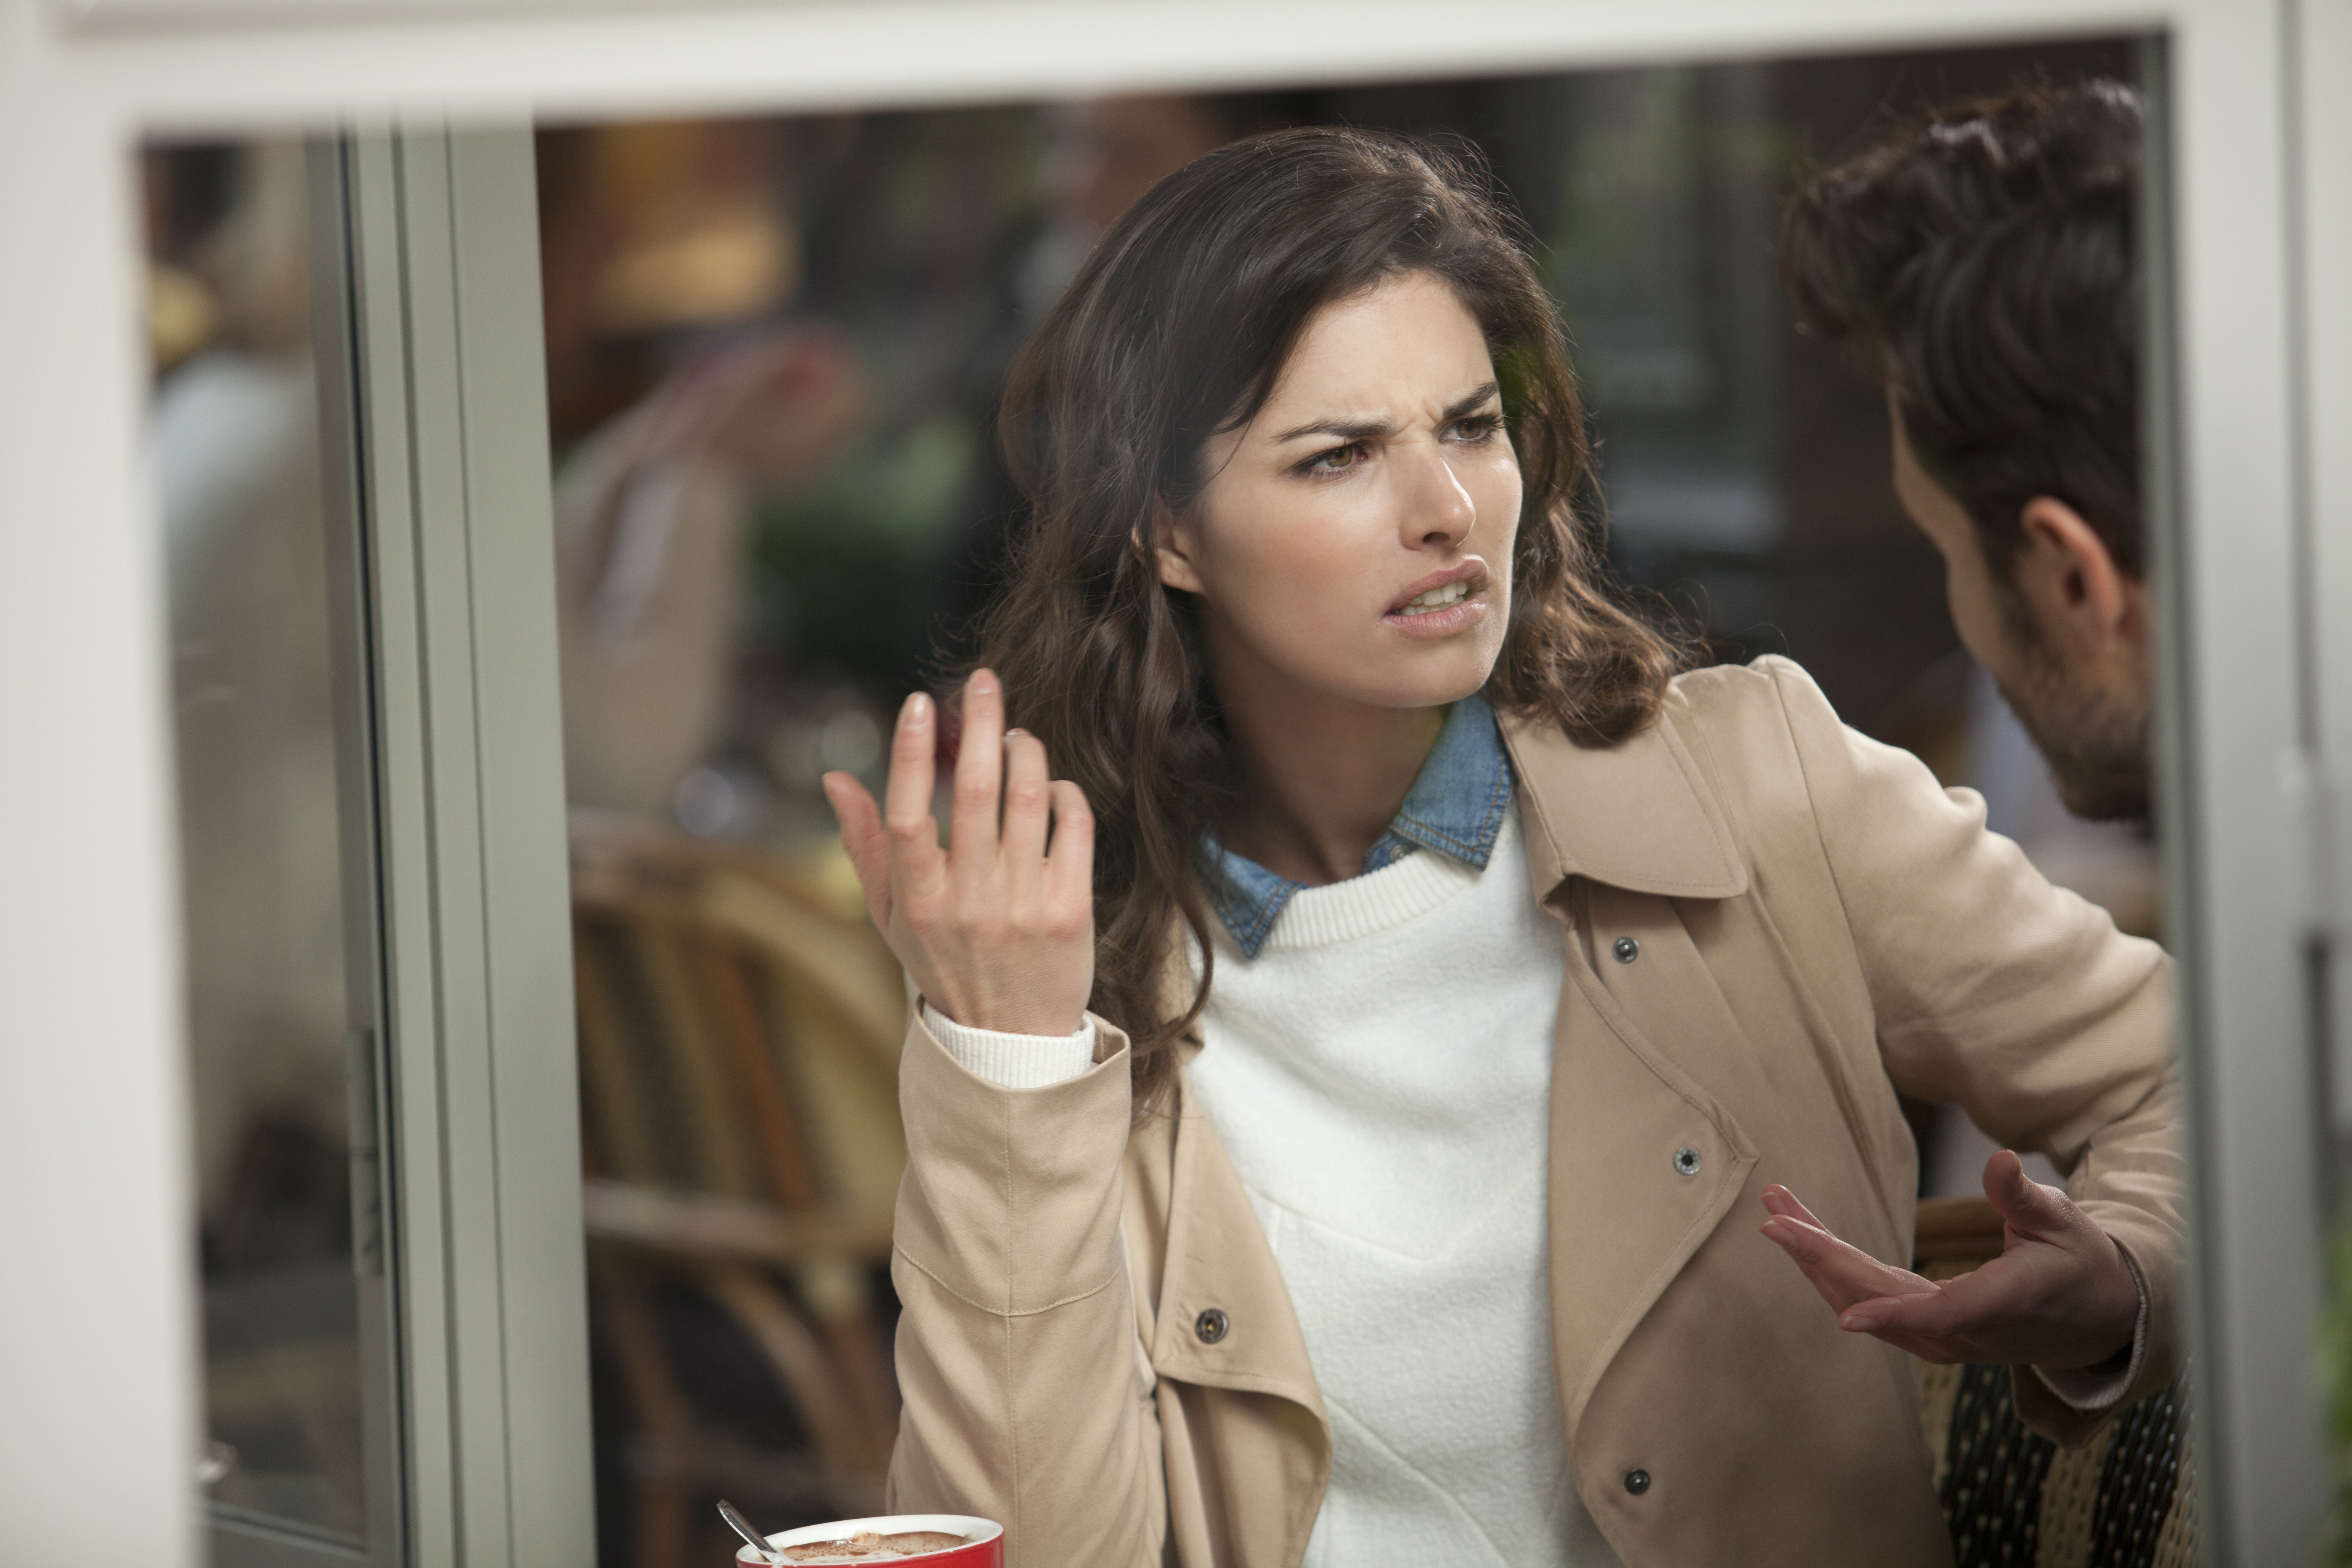 Couple arguing in a cafe | Source: Getty Images